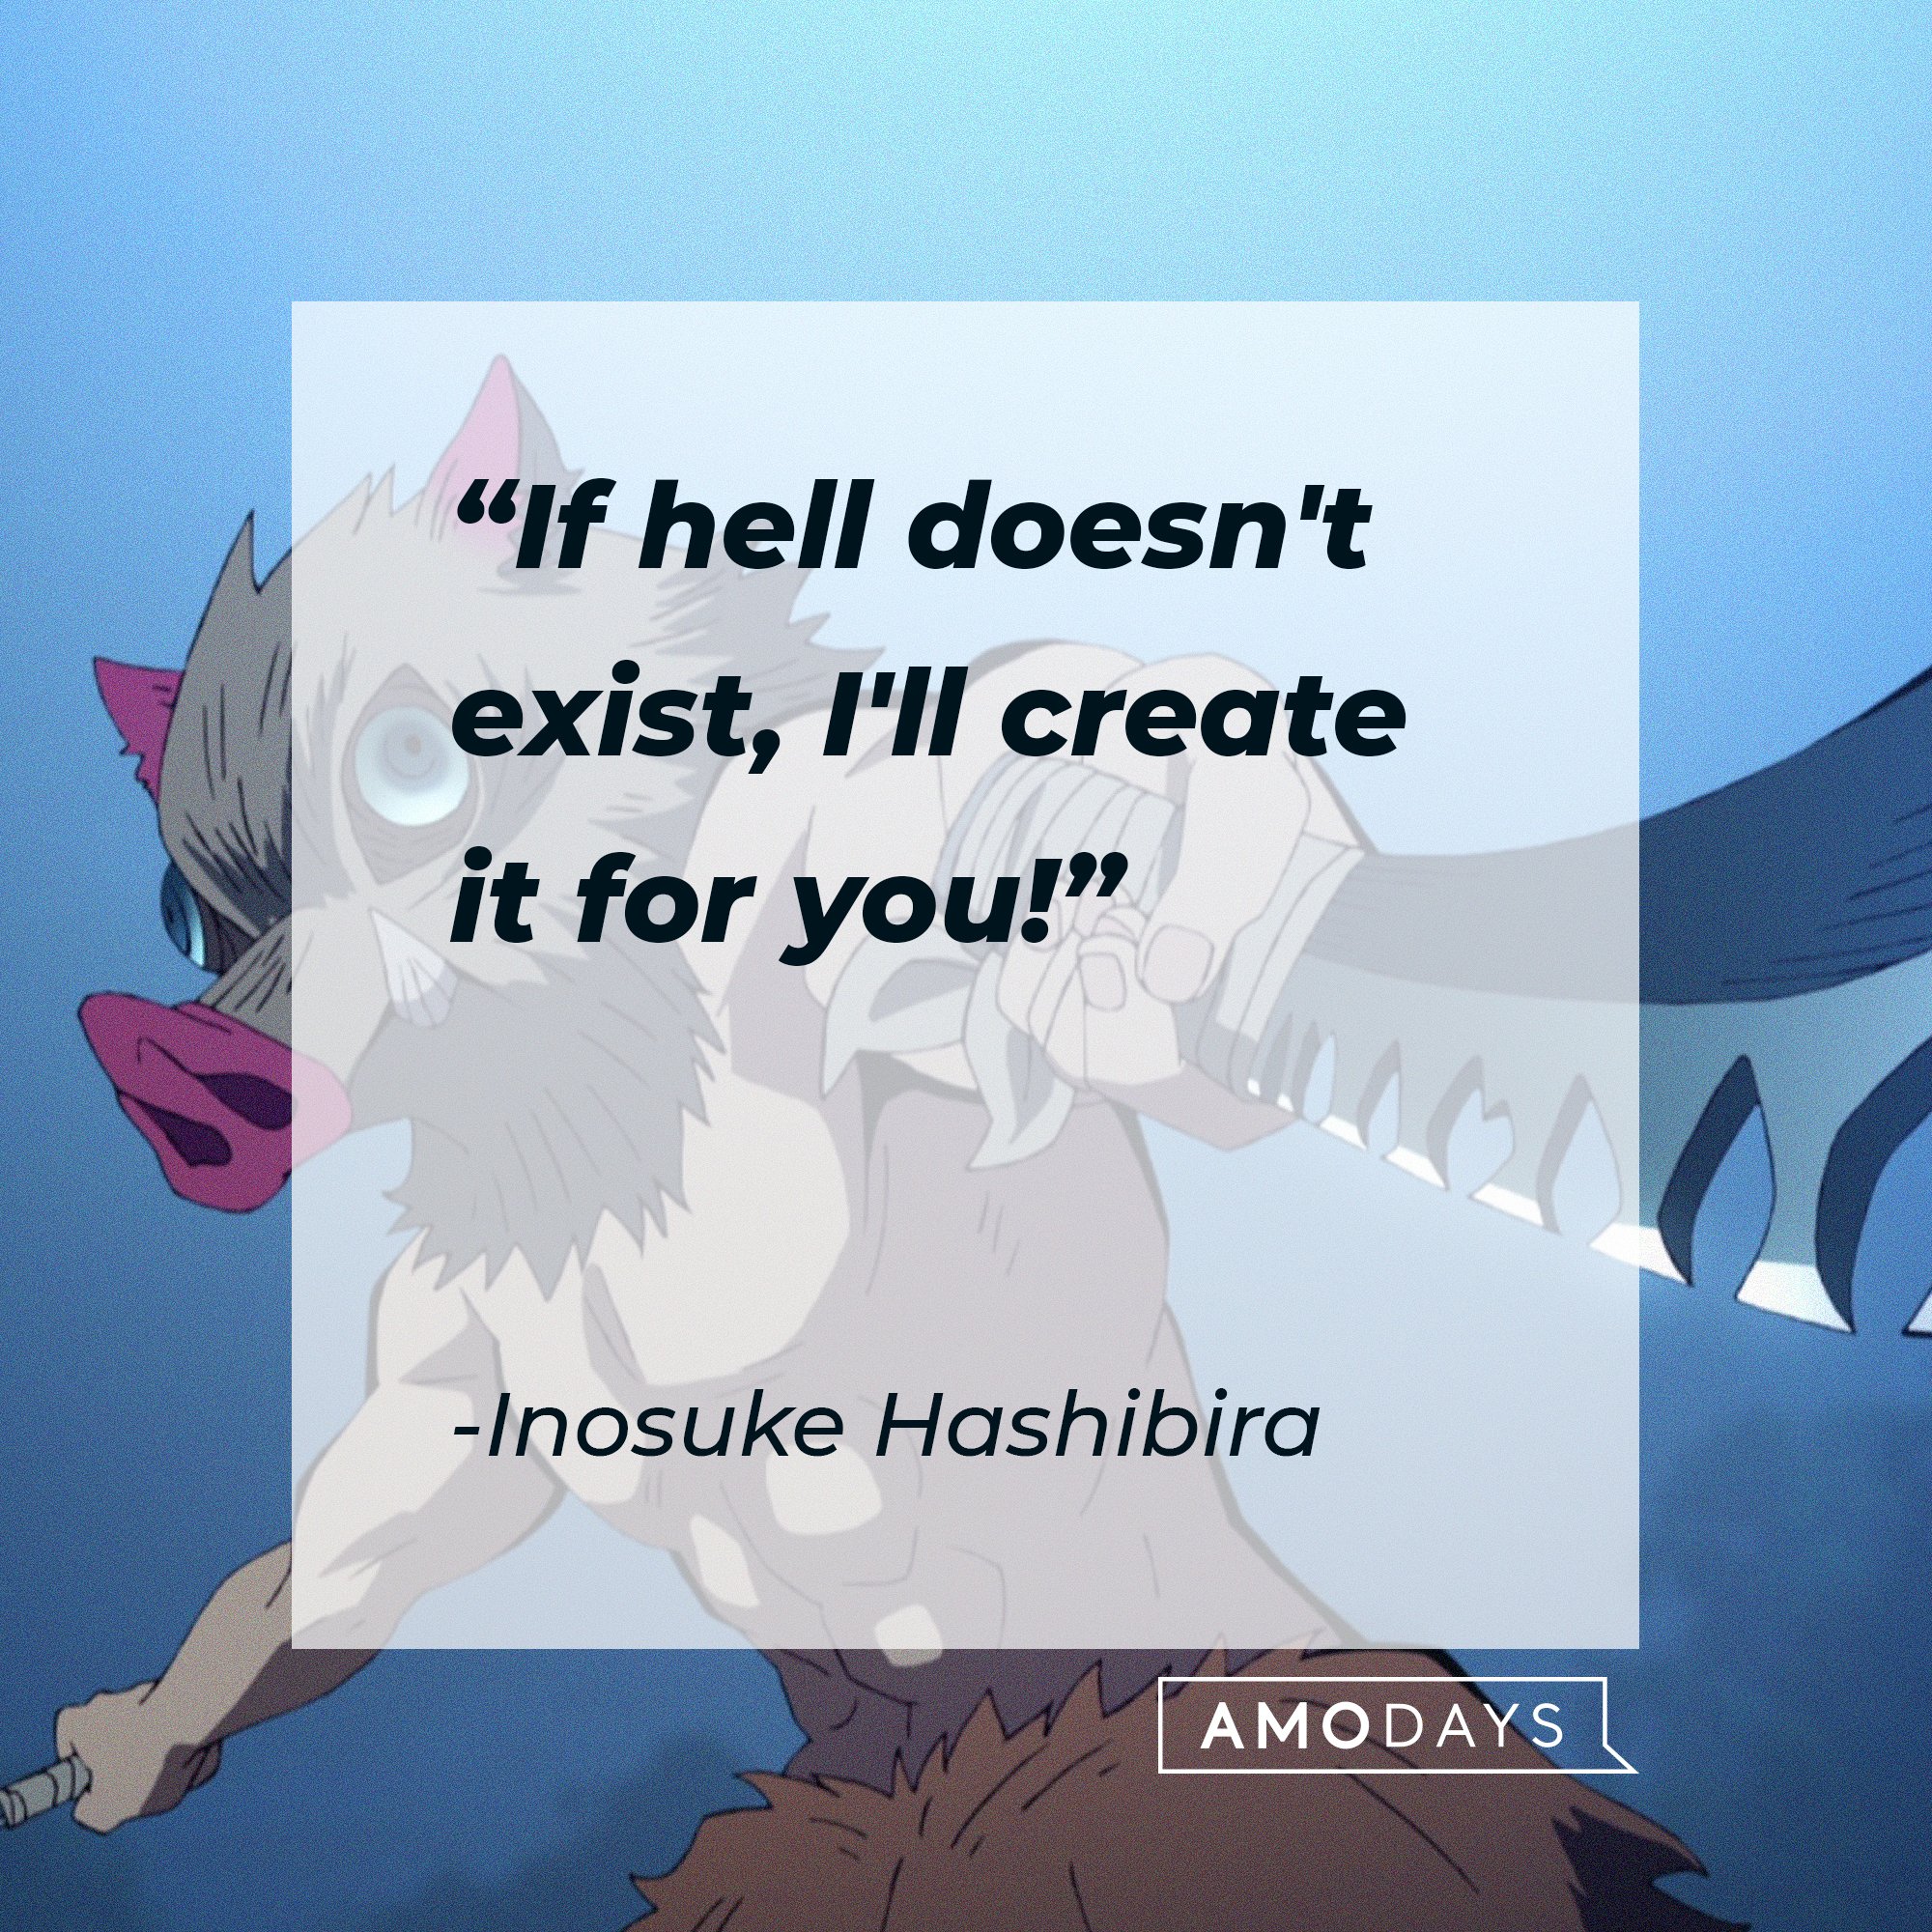 Inosuke Hashibira’s quote: "If hell doesn't exist, I'll create it for you!" | Image: AmoDays